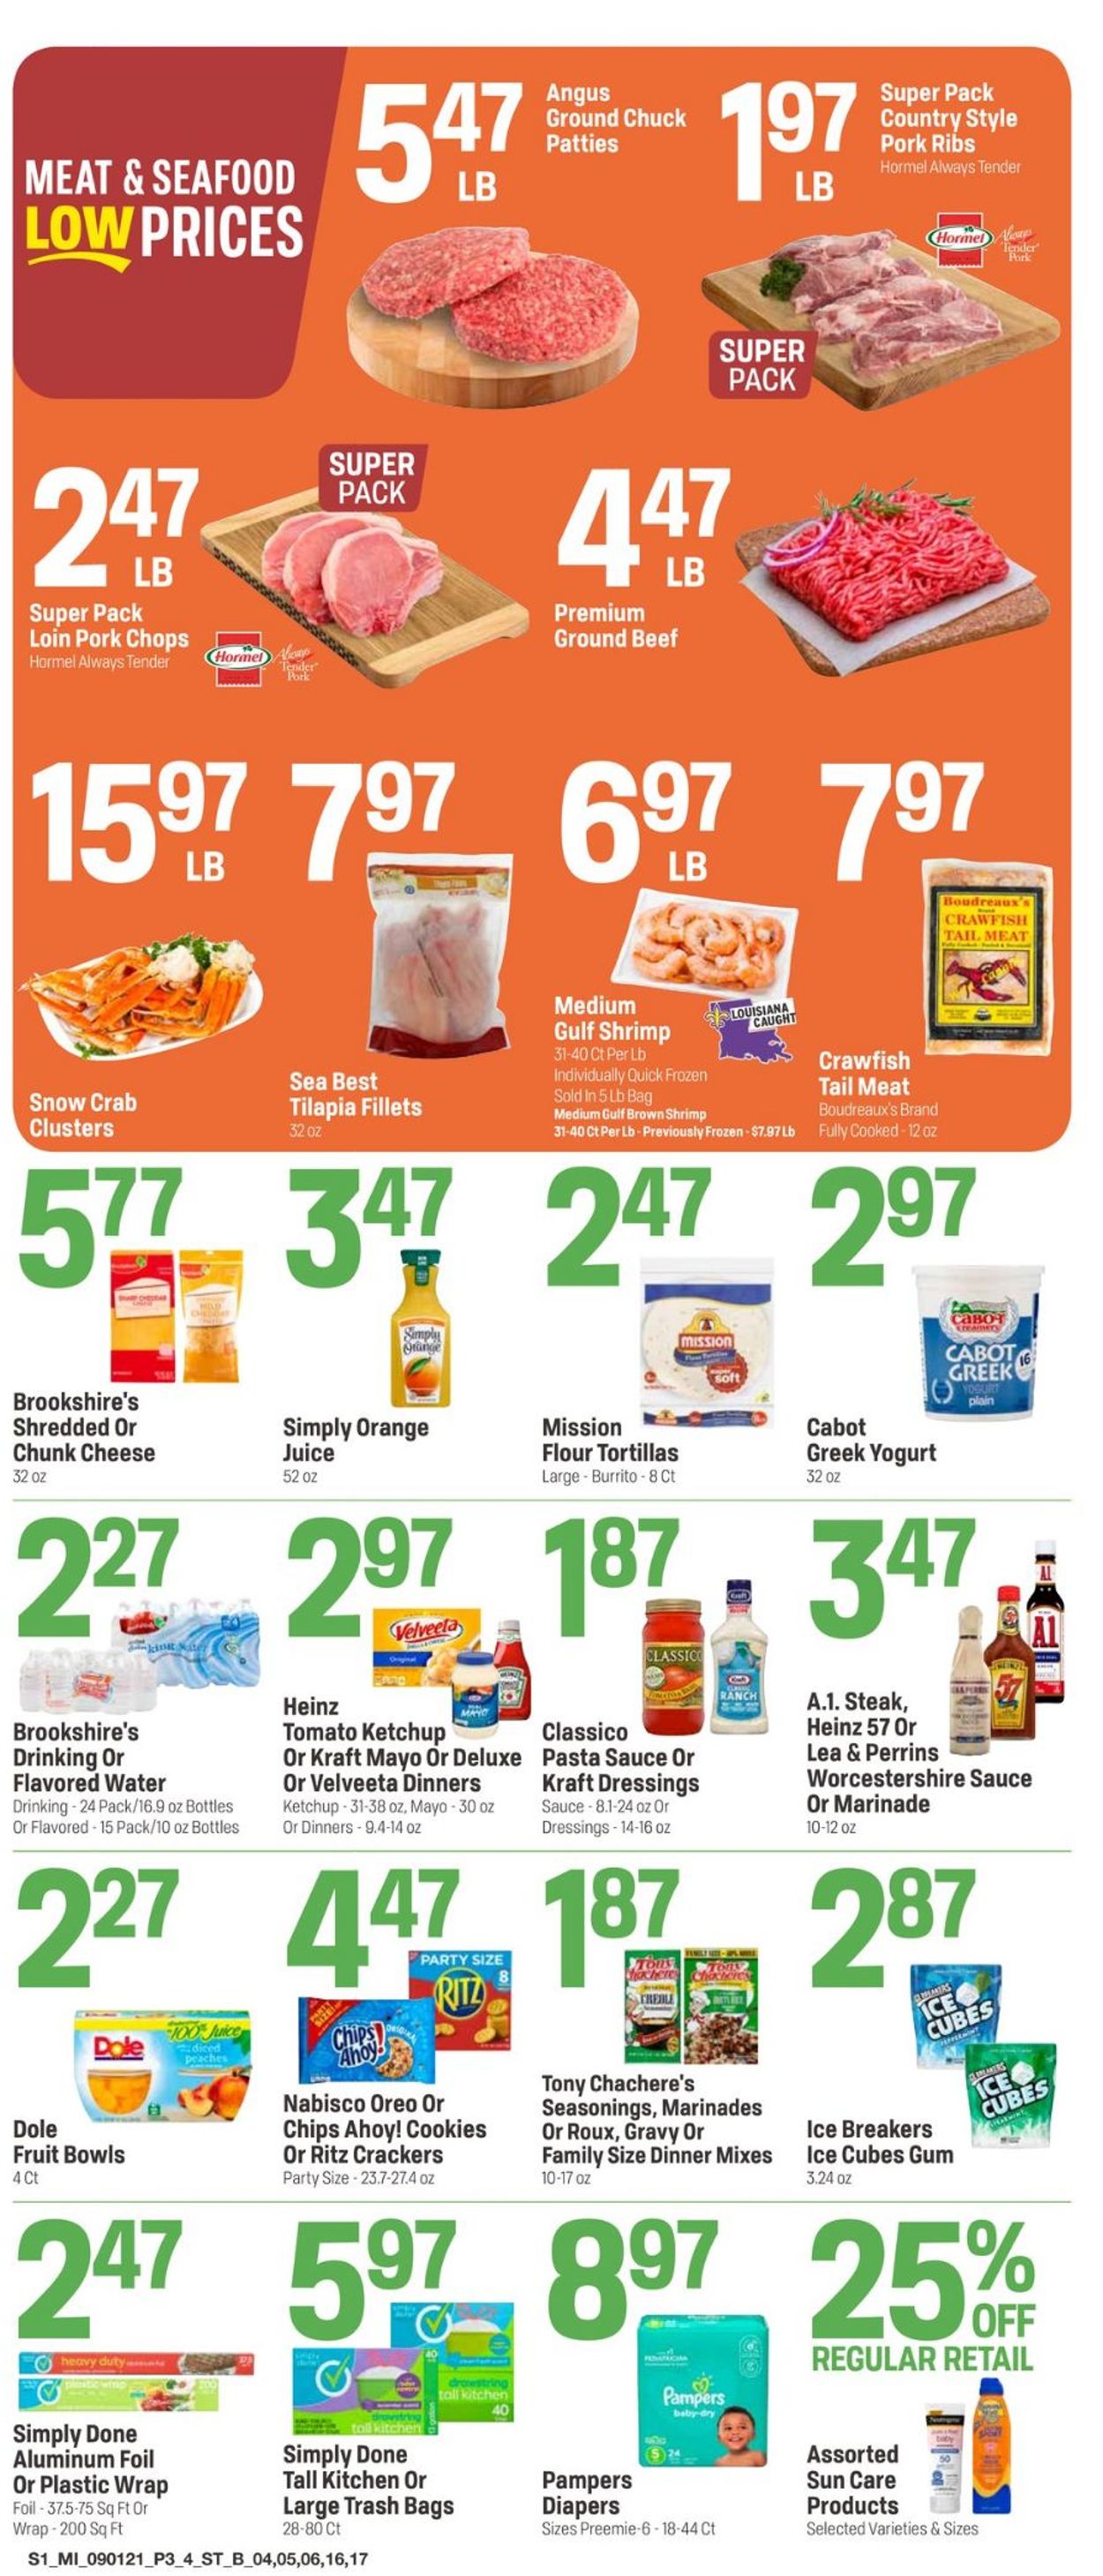 Catalogue Super 1 Foods from 09/01/2021